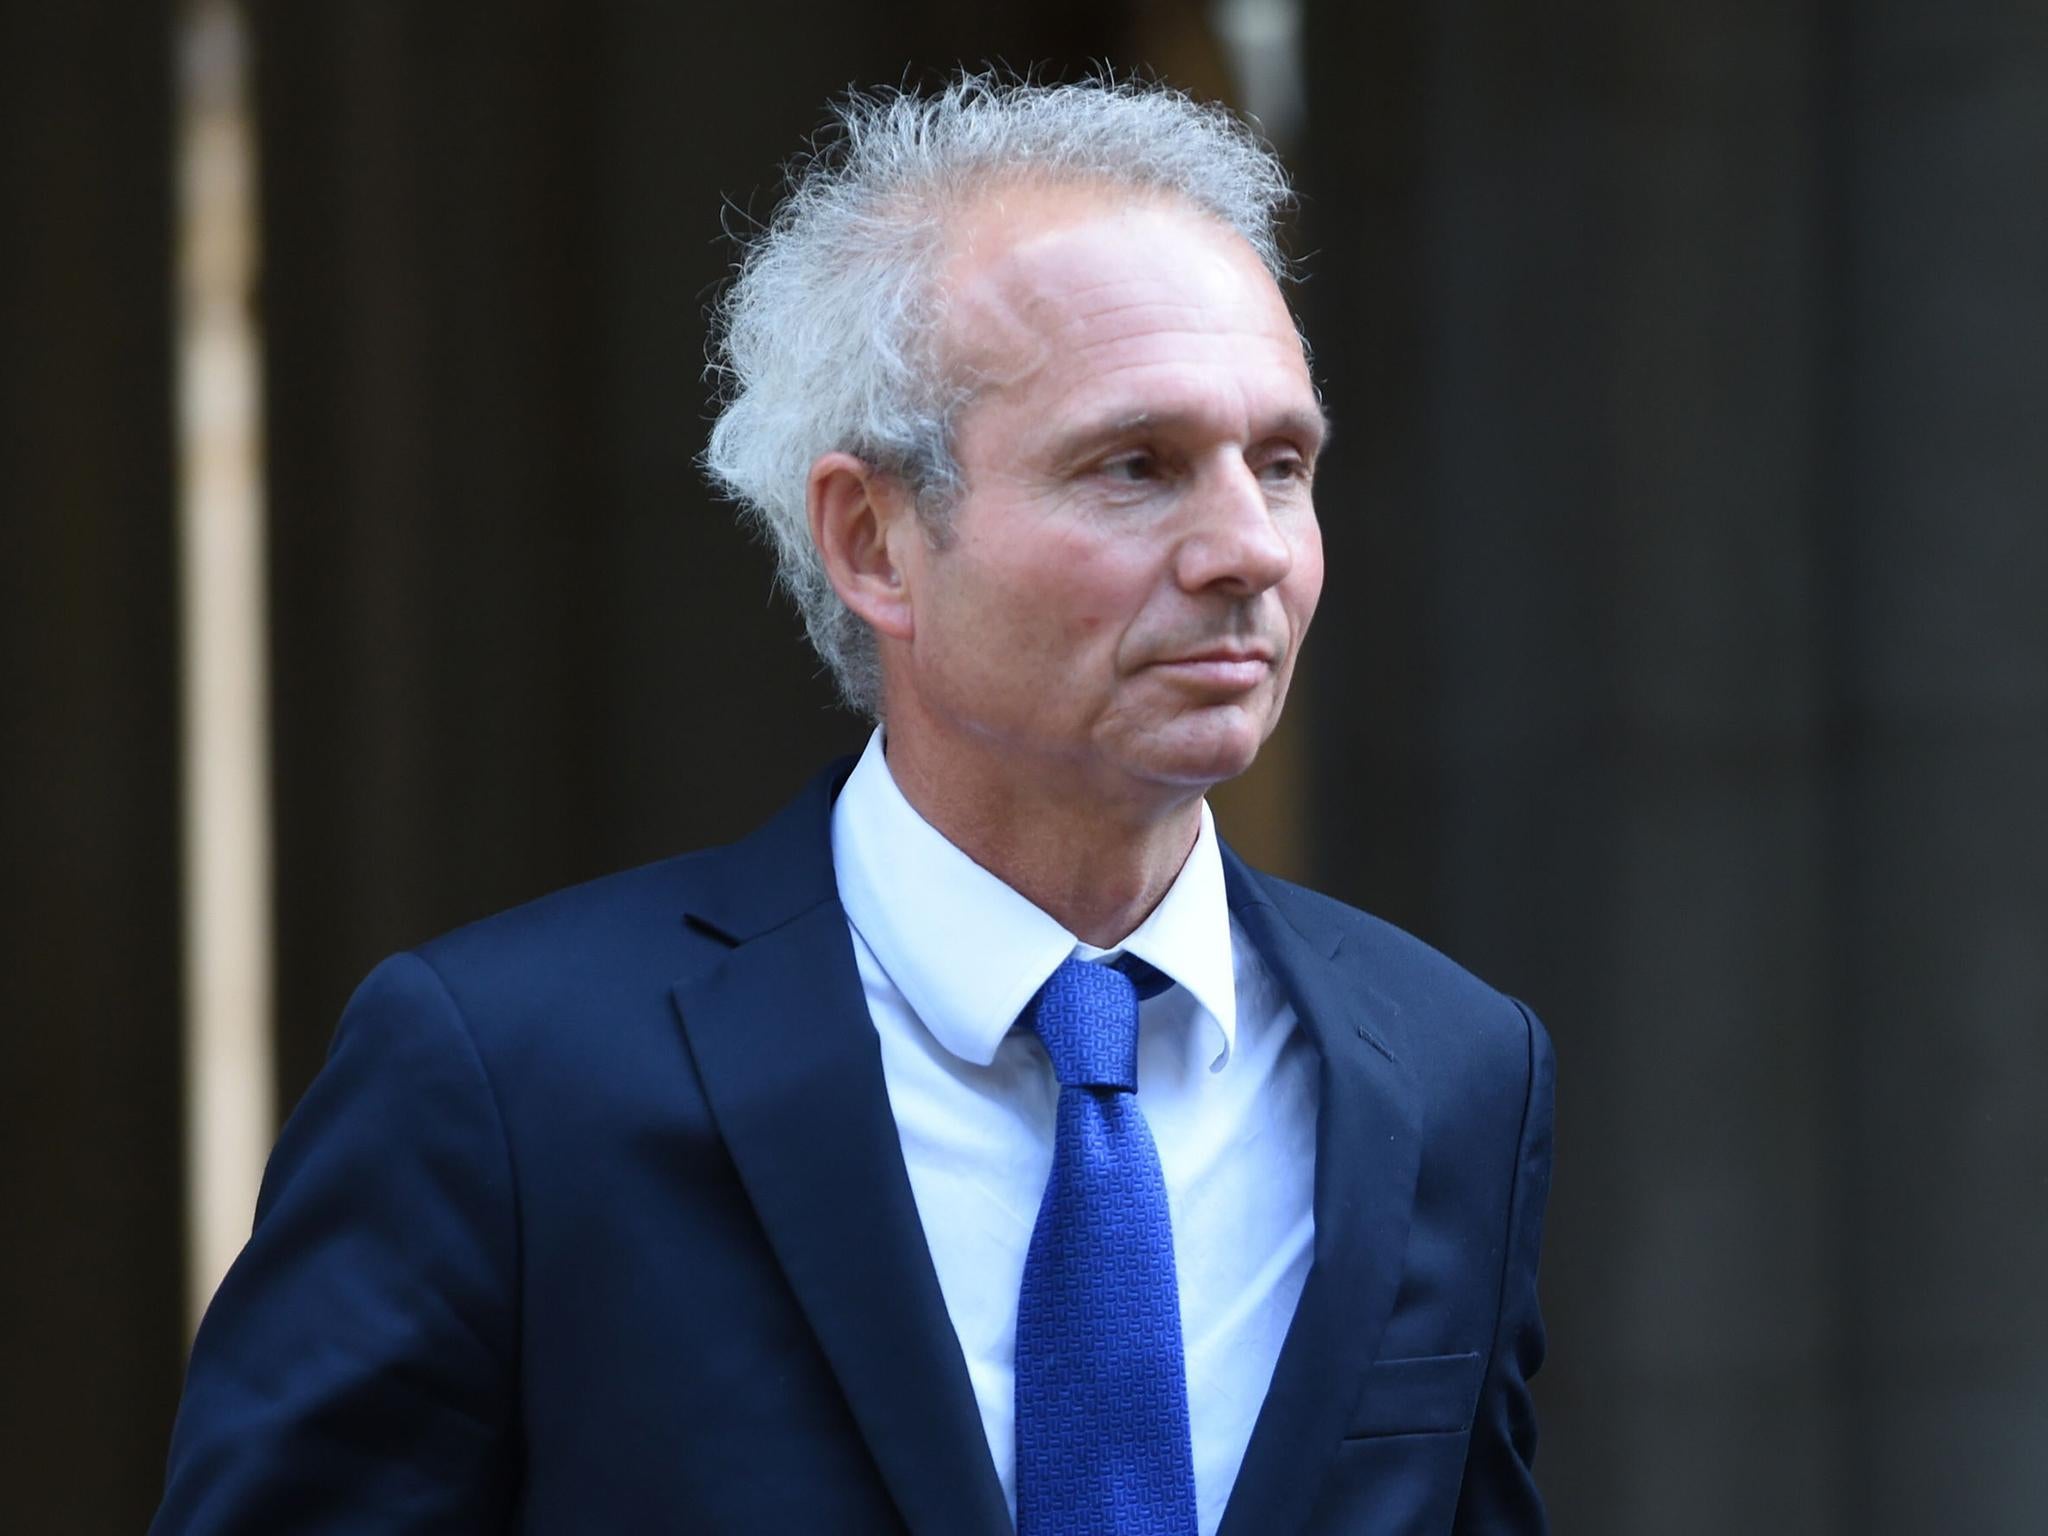 David Lidington has previously said Brexit would be disastrous for the UK economy